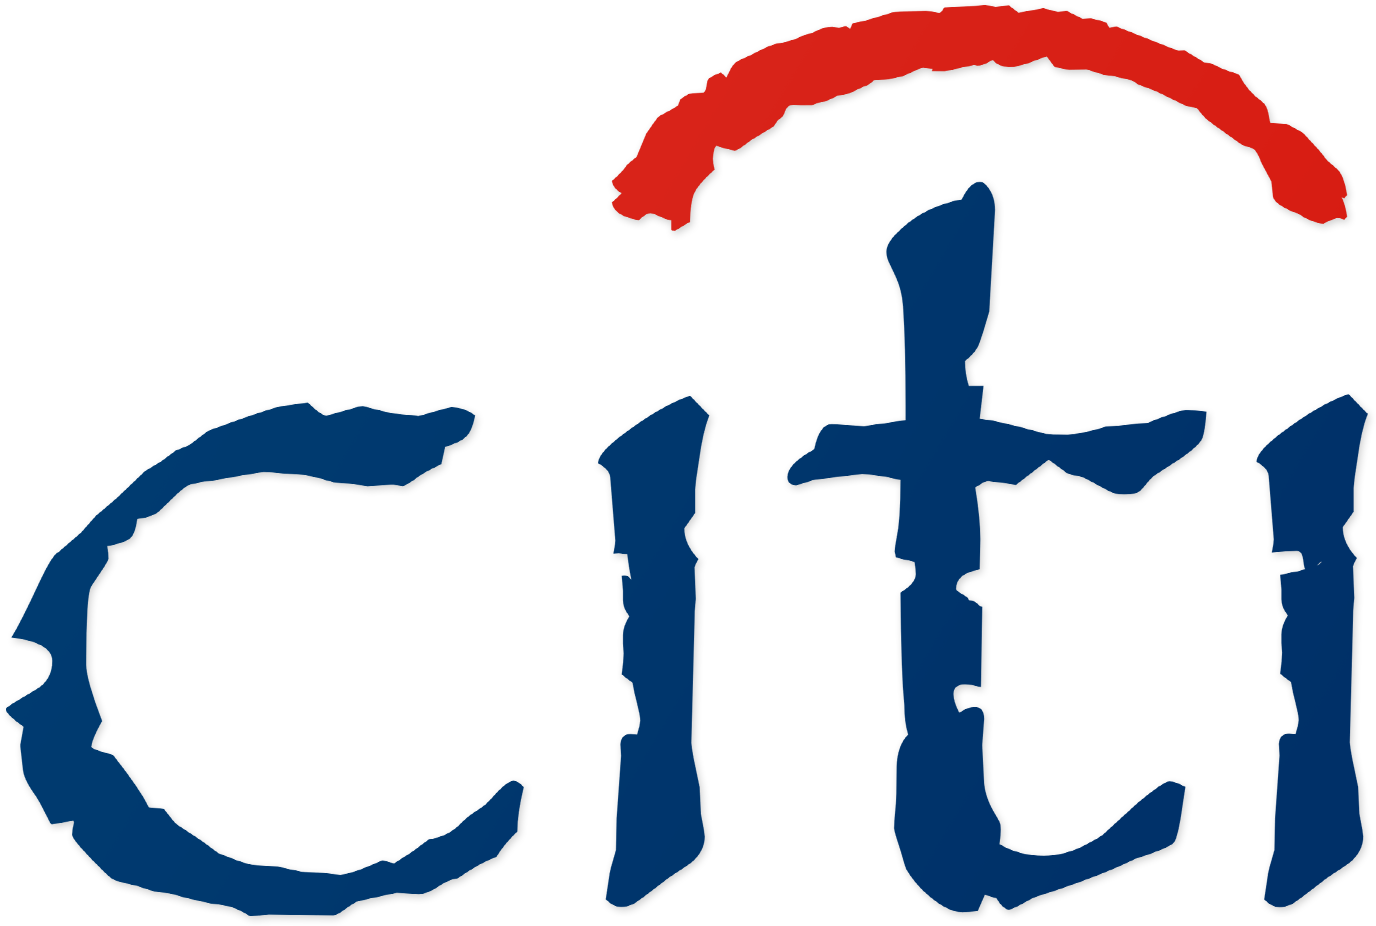 Citi Logo In Papyrus Font - Logos In Papyrus (1770x1093)